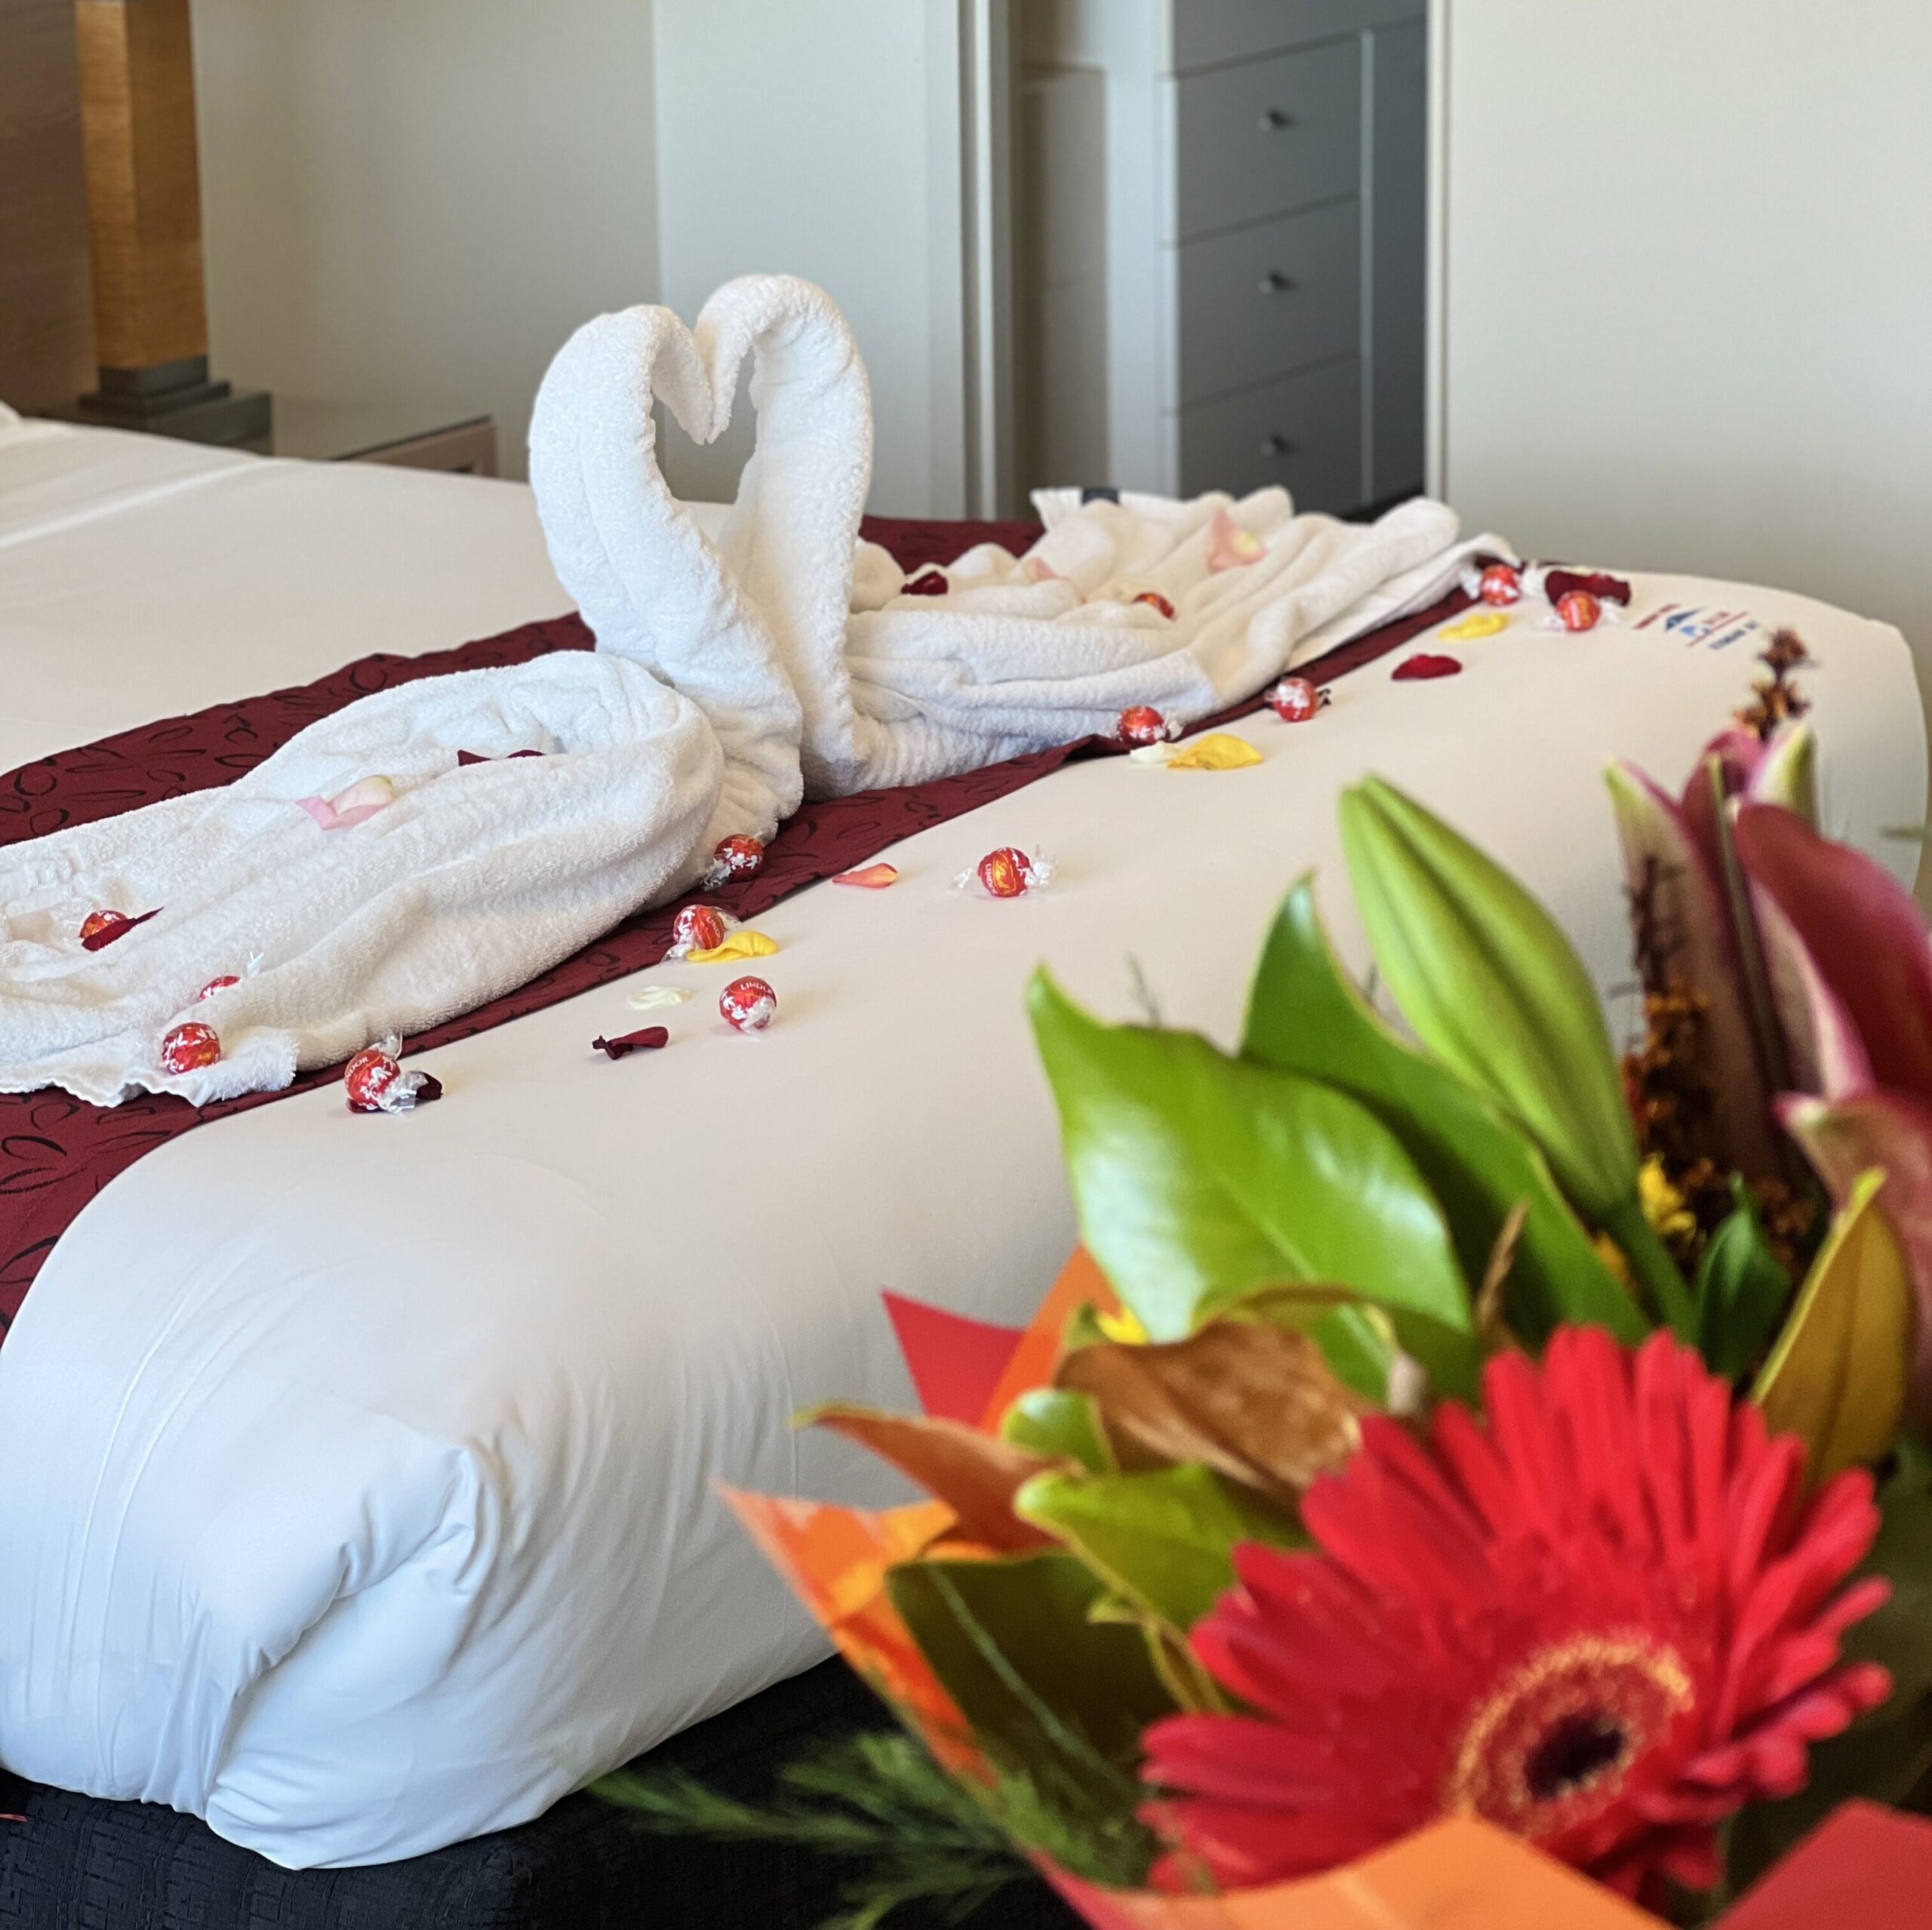 A wedding room decorated with flowers, candies and towel swans in Bunbury Hotel Koombana Bay